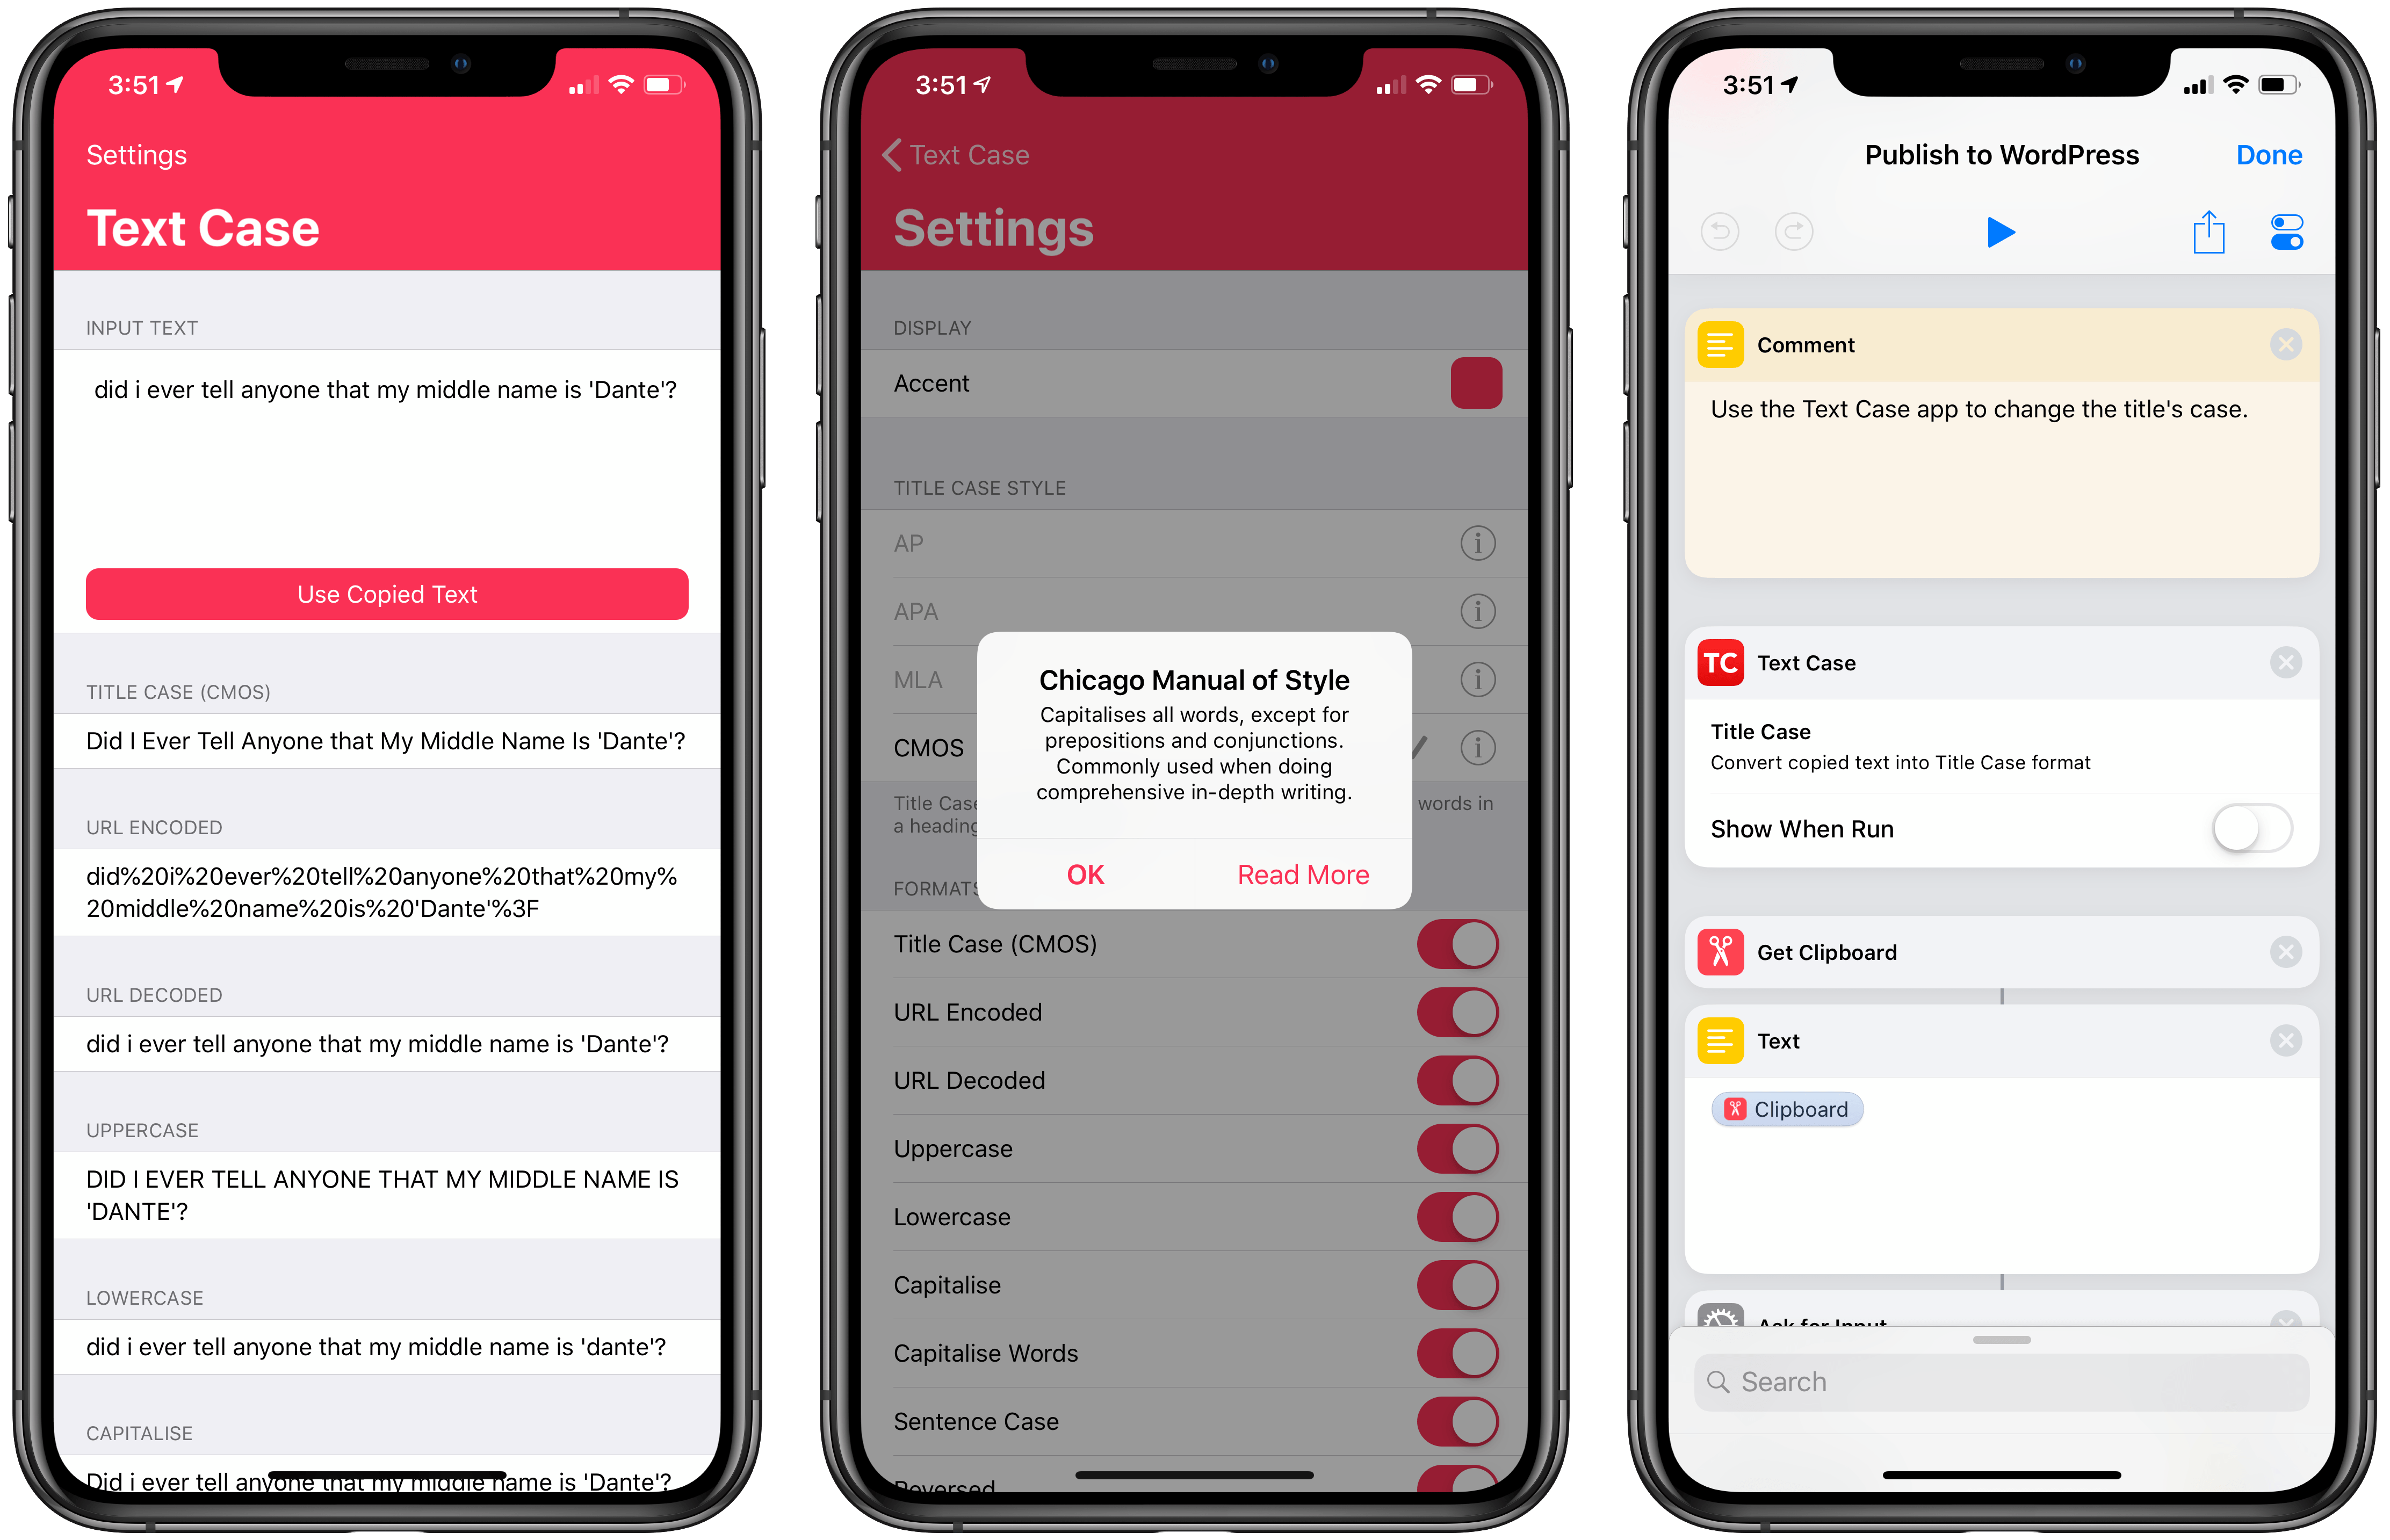 Text Case offers text capitalization shortcuts that can be used in the Shortcuts app (right).